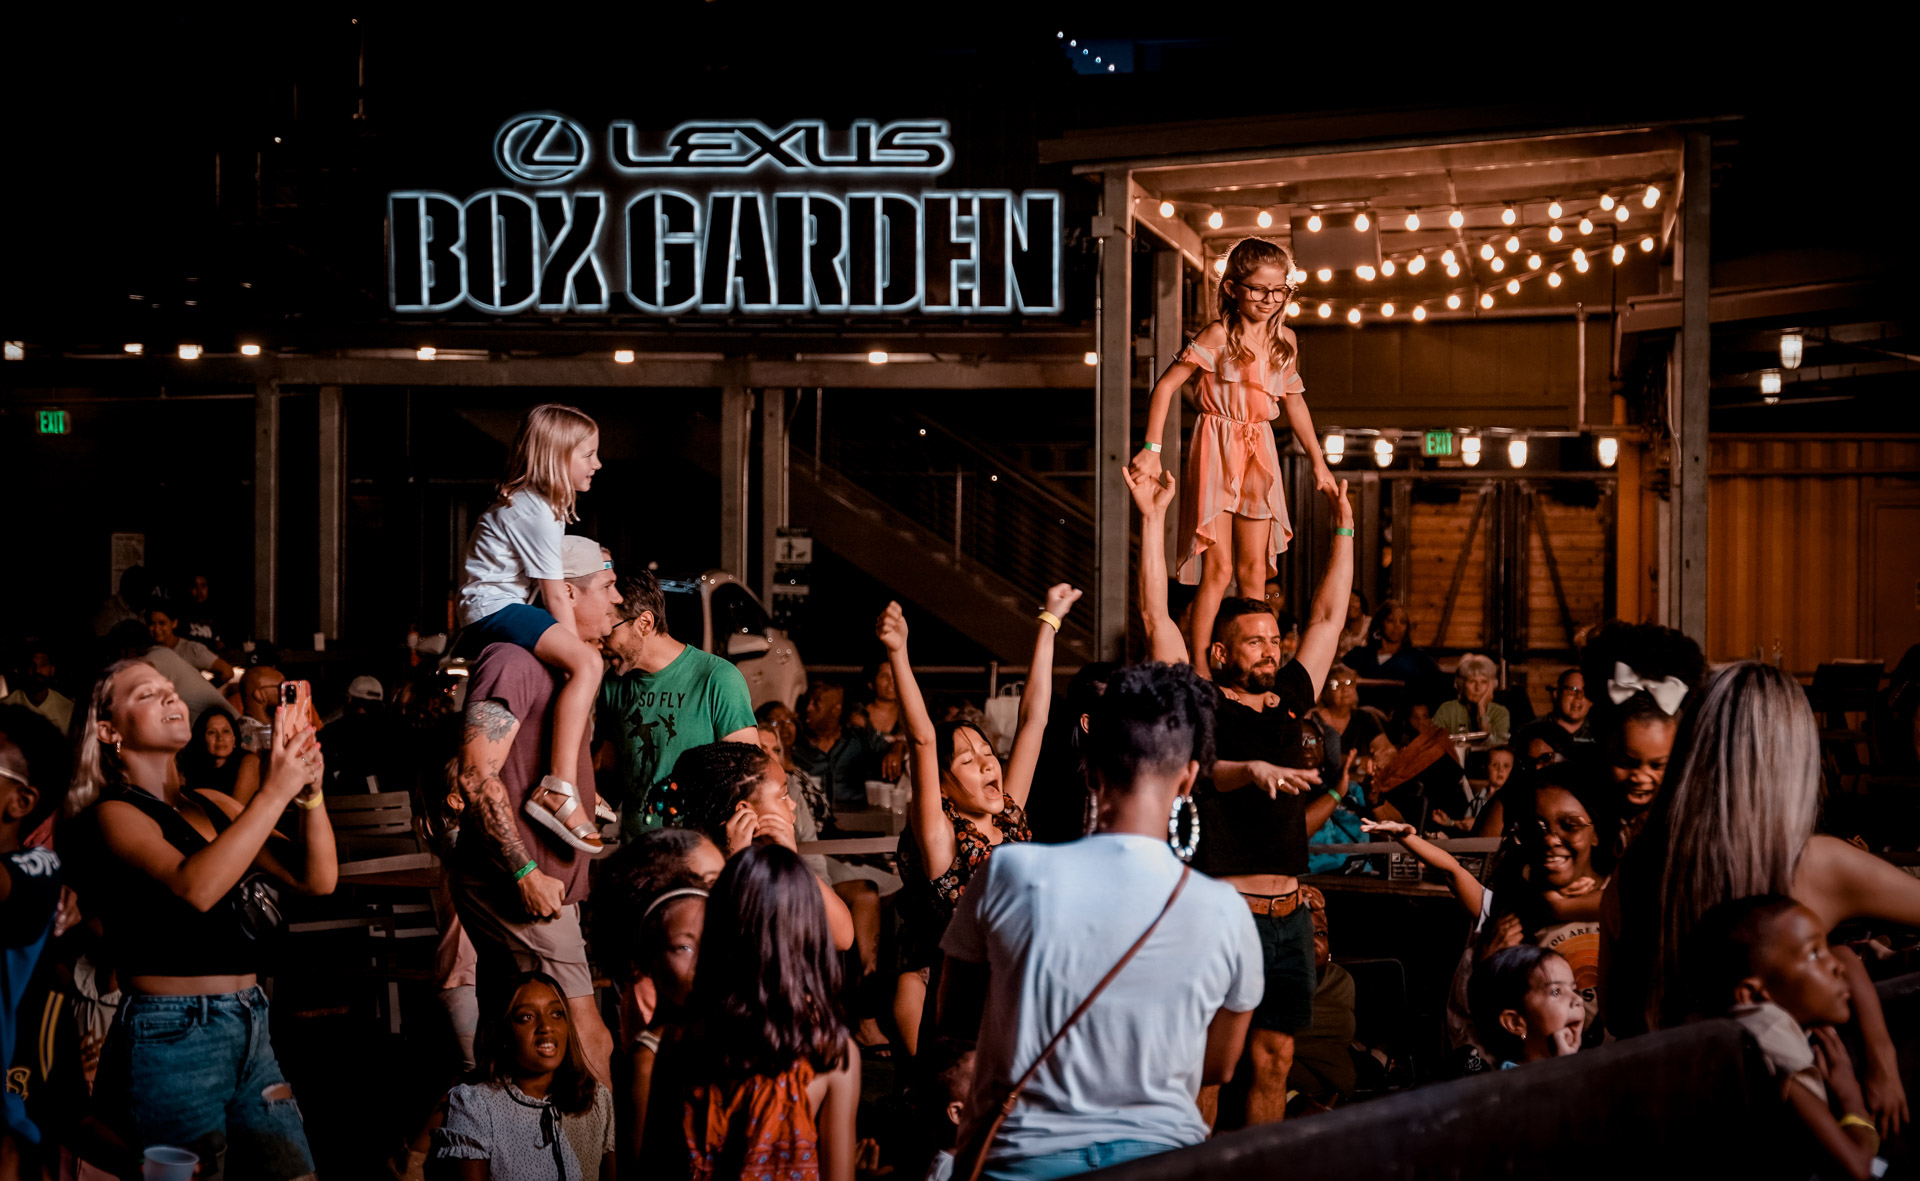 A crowd of people with kids on adults' shoulders